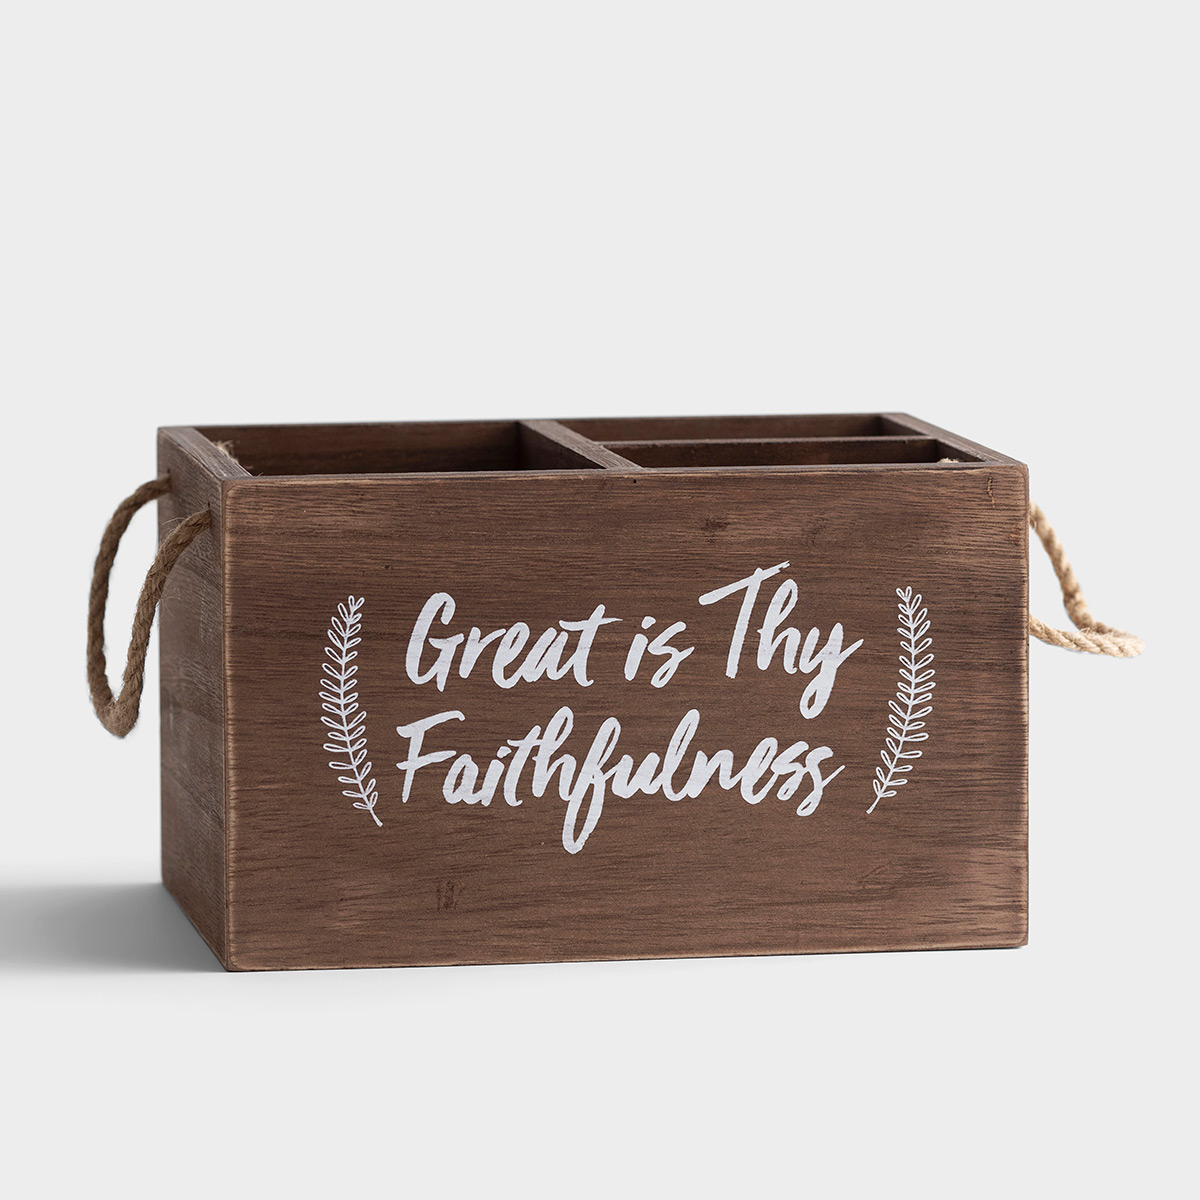 Great Is Thy Faithfulness - Utensil and Desk Organizer Caddy